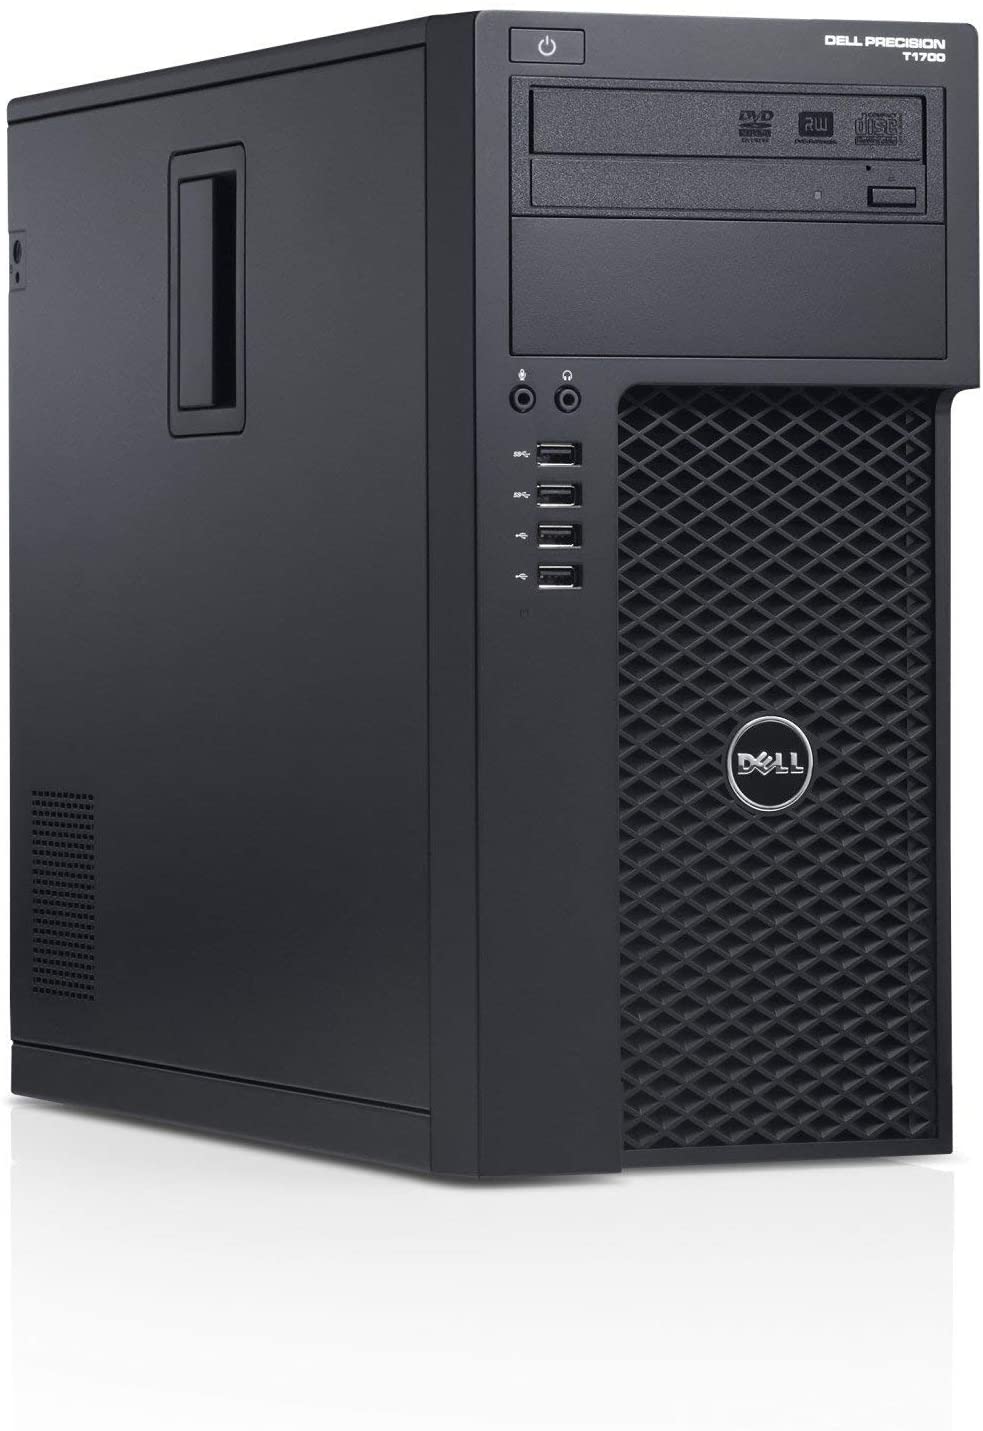 Dell Precision WORKSTATION T1700 Bundle | Intel Core i7-4770 3.4Ghz | Ram 16Gb | SSD 480Gb | Nvidia Quadro NVS 300/310 | AOC I2475PXQU LED IPS Monitor 23.8″ 1920×1080 Pixels Full HD | Wired Mouse and Keyboard Kit